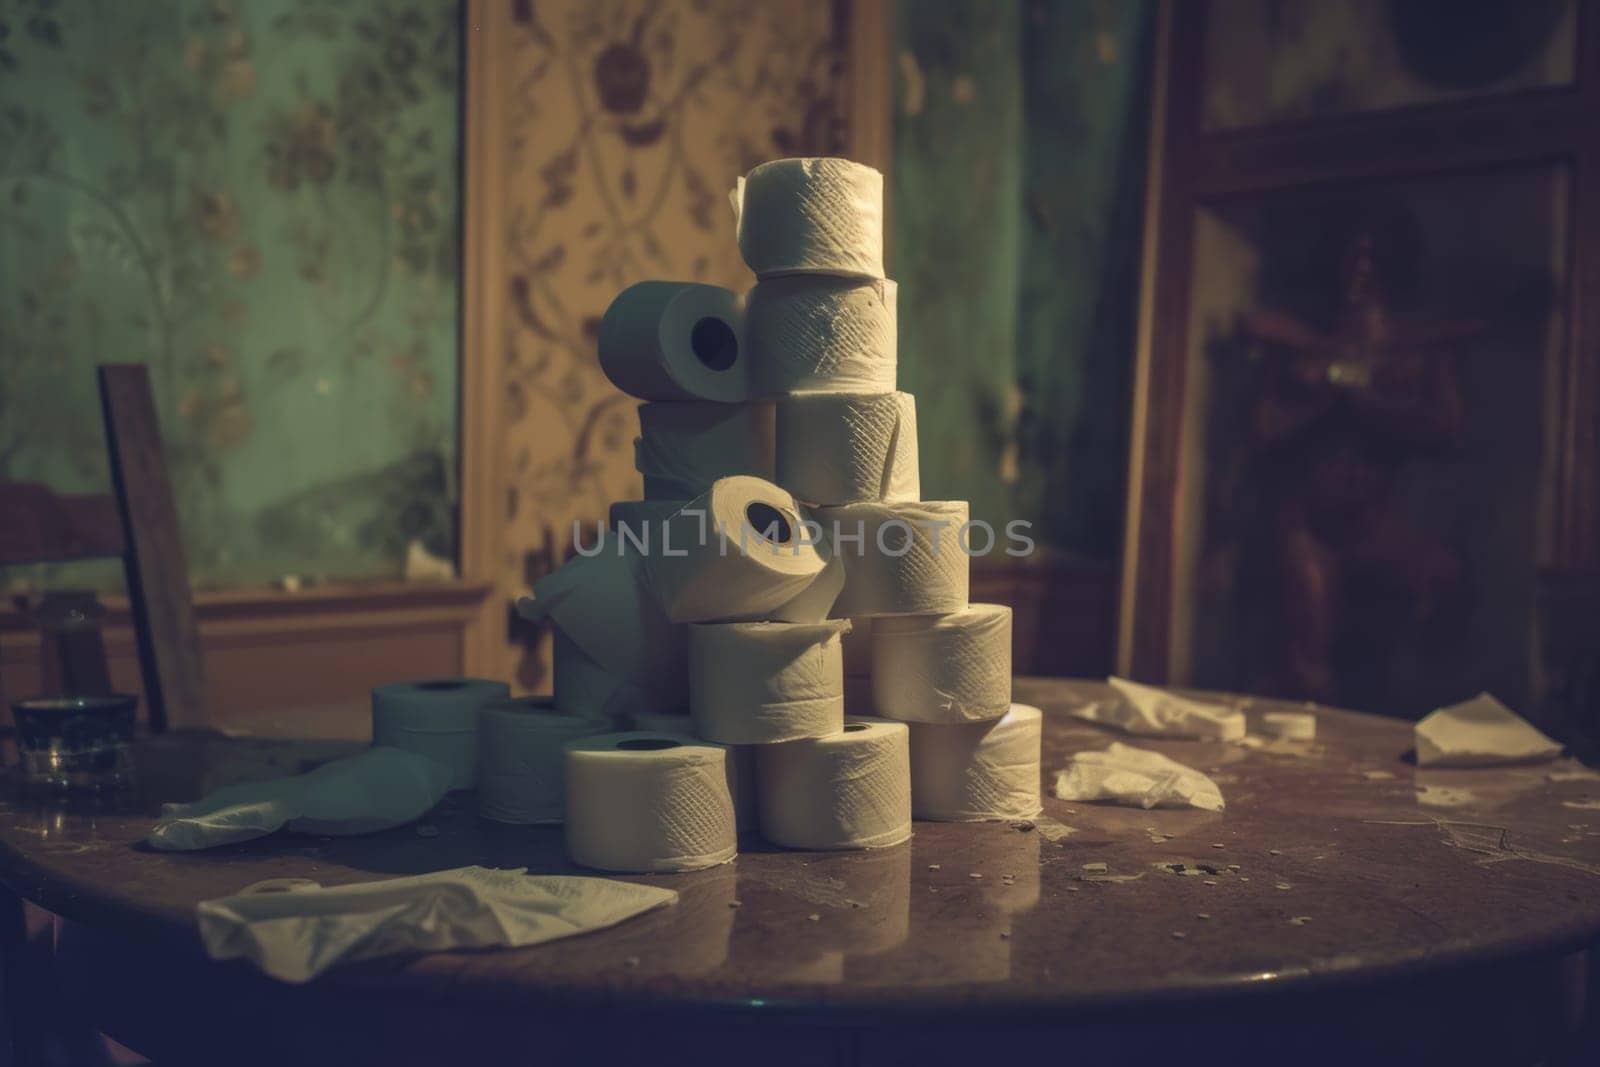 Lots of toilet paper rolls stacked on the table. Soft sanitary paper.